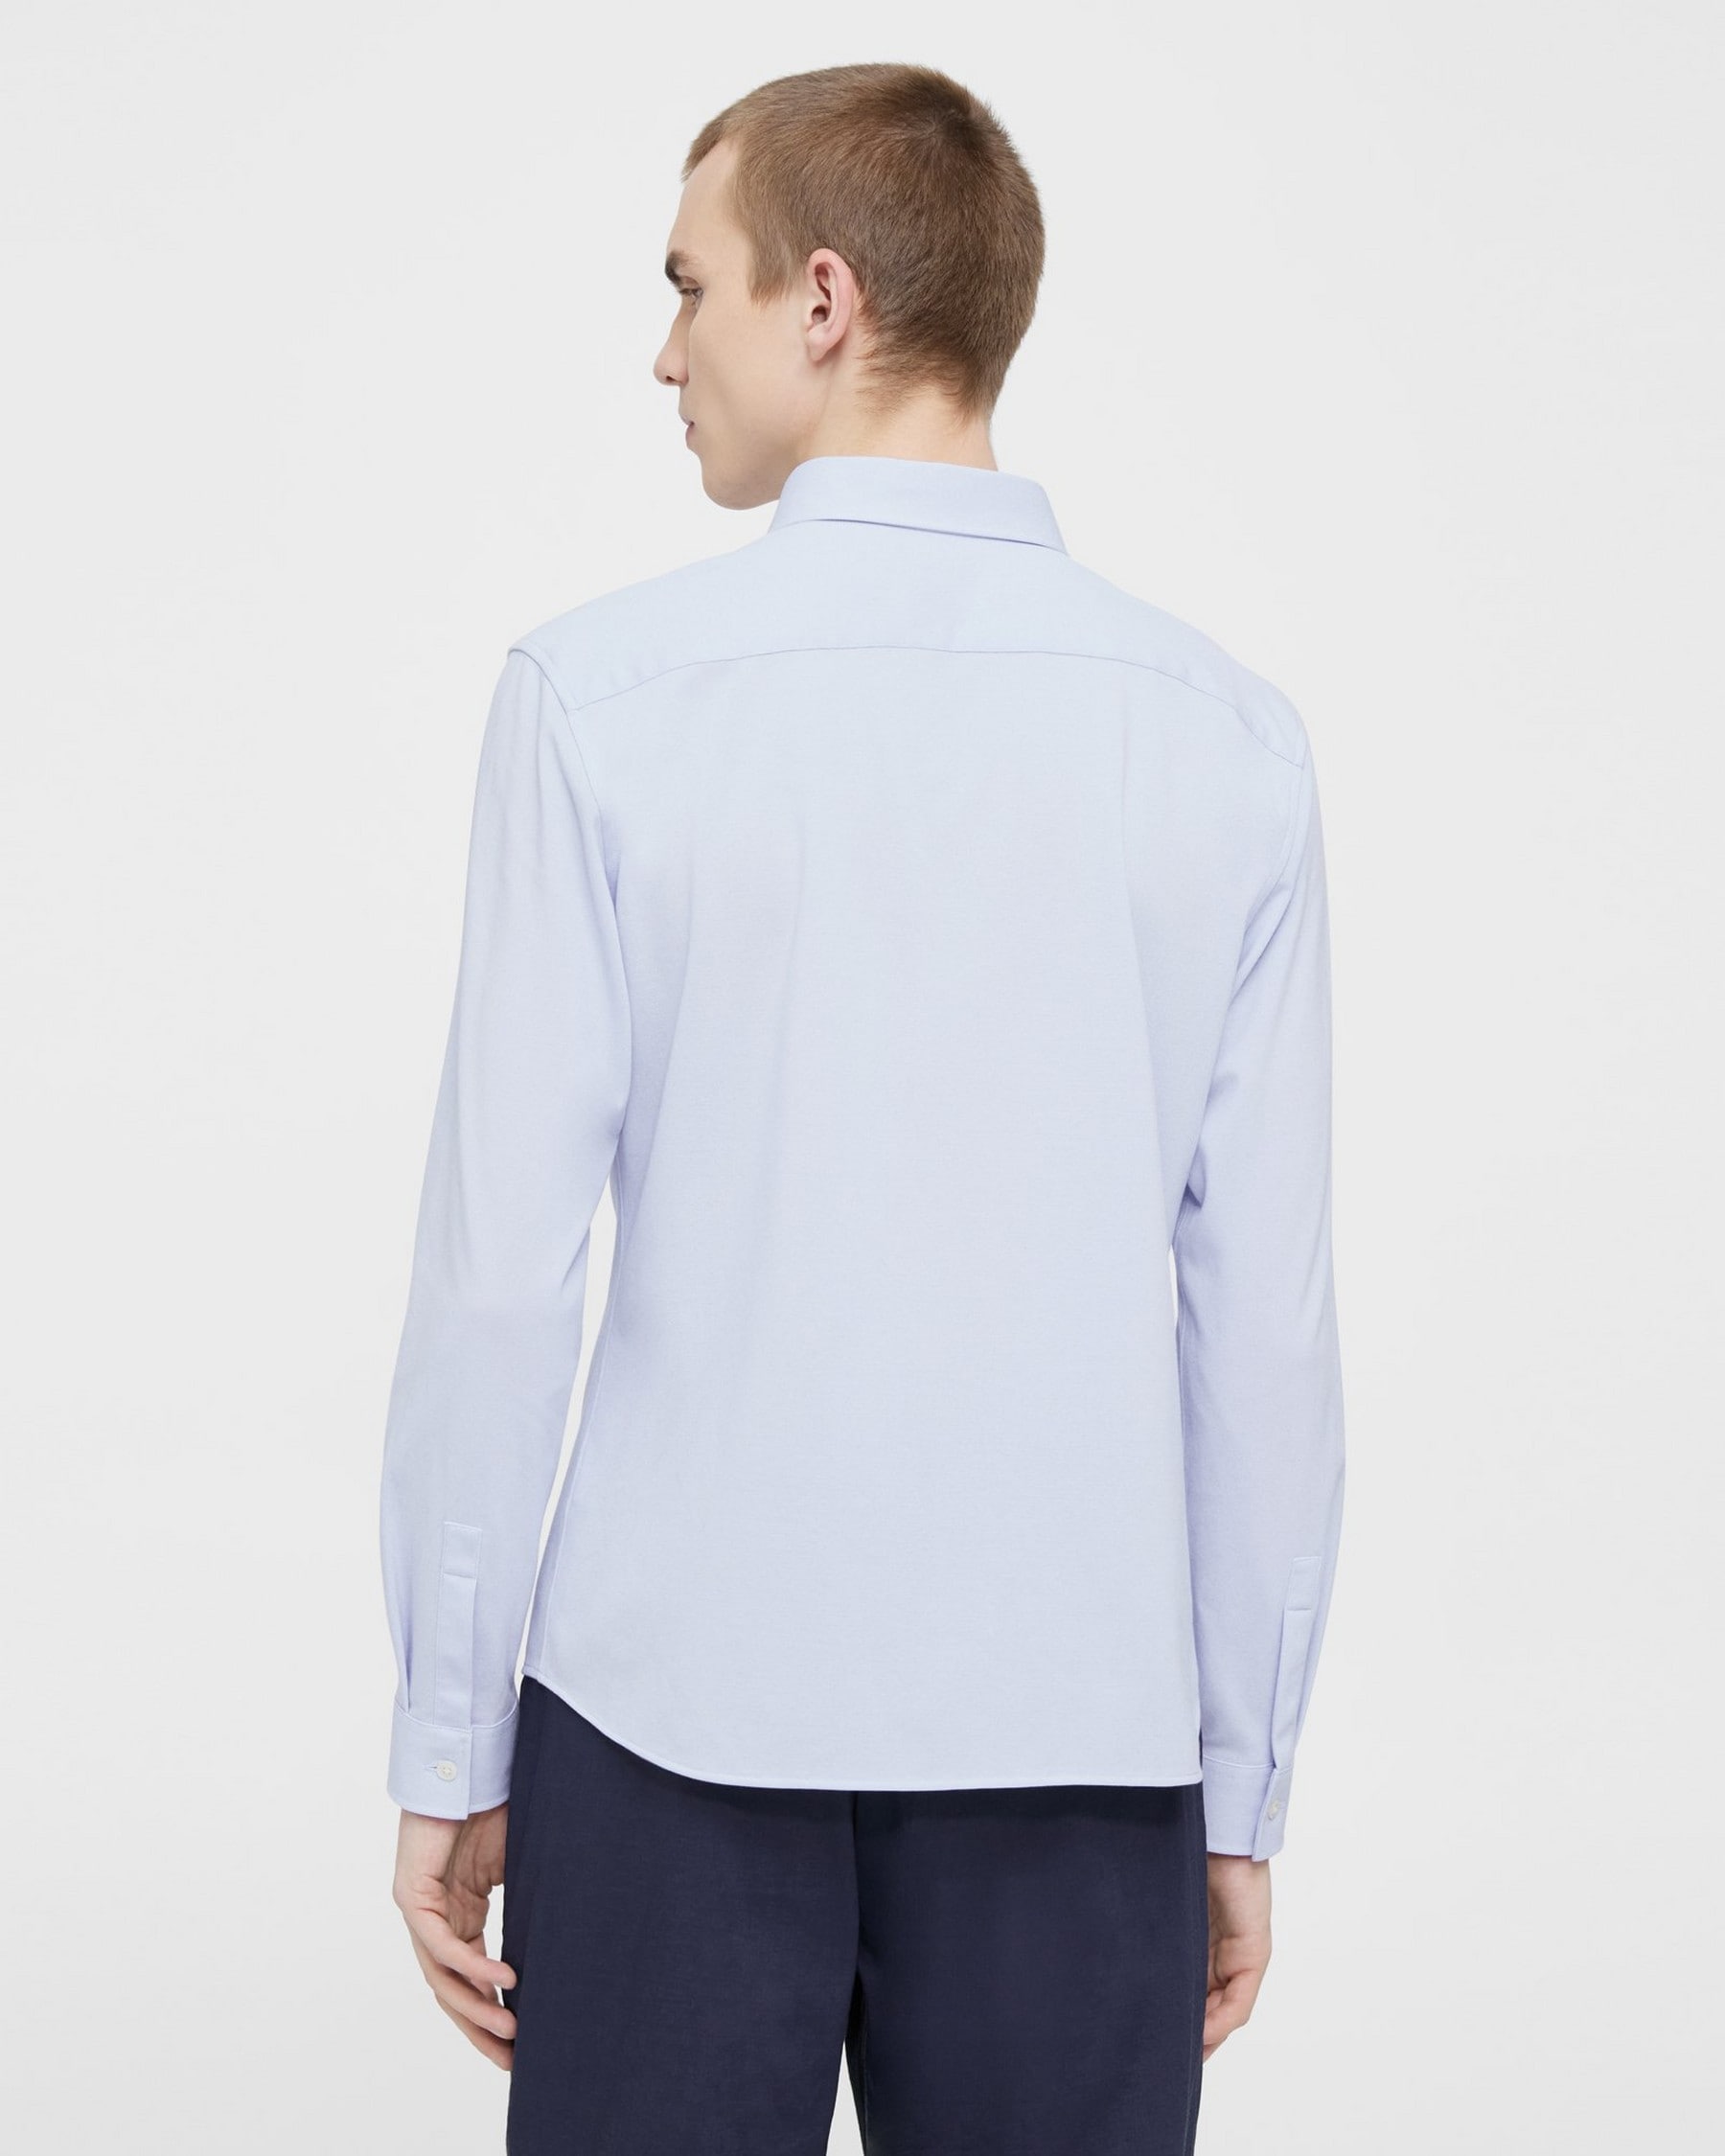 Alfred Shirt in Structured Piqué